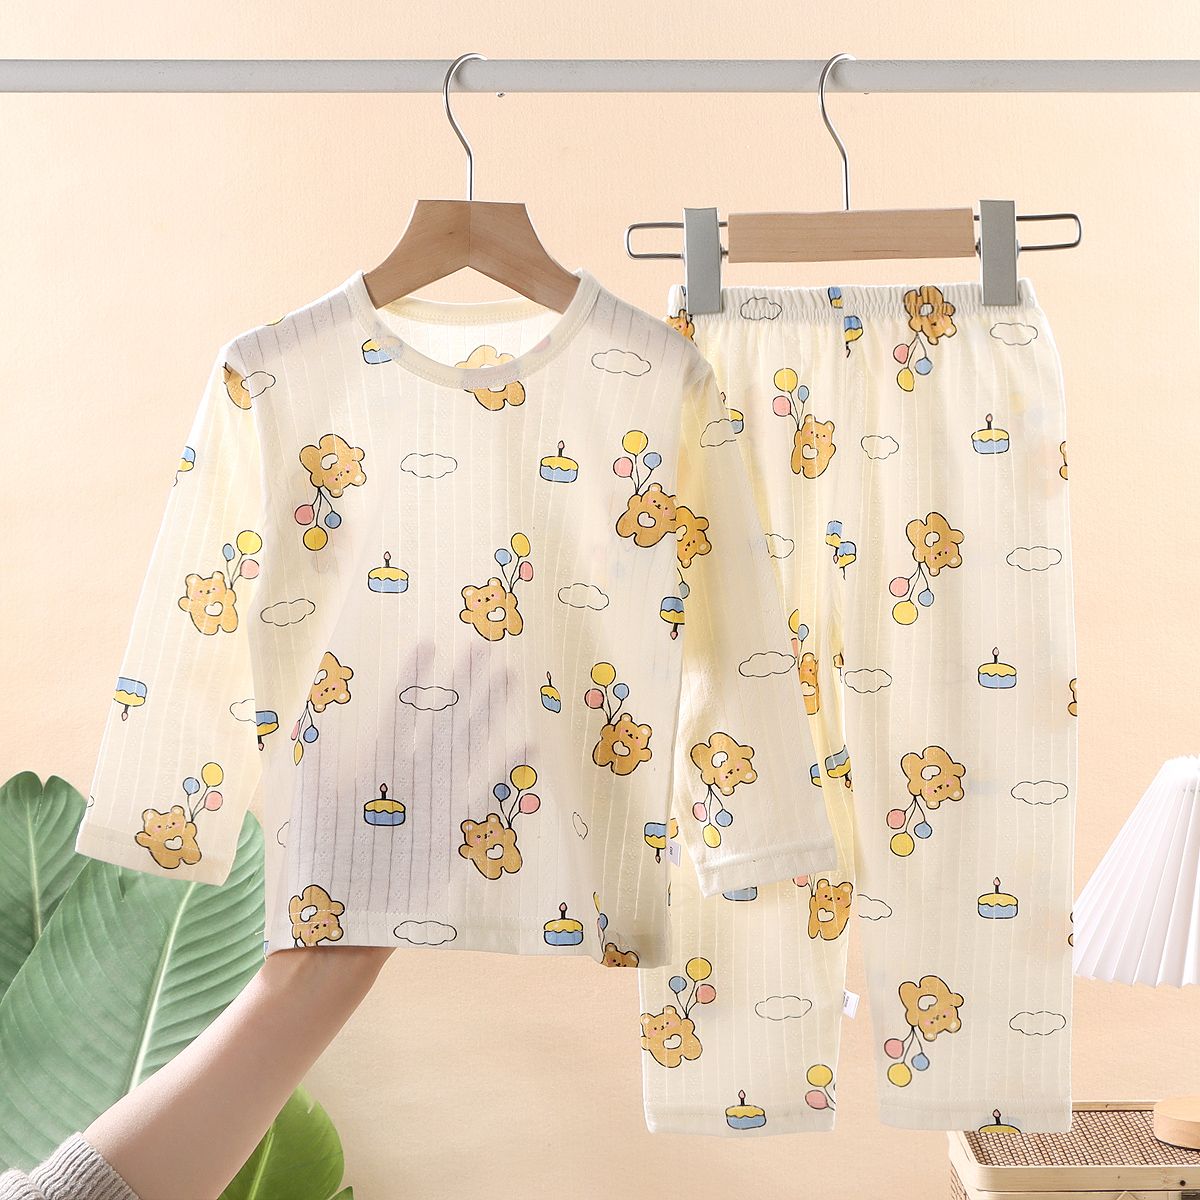 Children's pajamas set summer thin men's and women's pajamas pure cotton home service baby long-sleeved trousers air-conditioning clothing